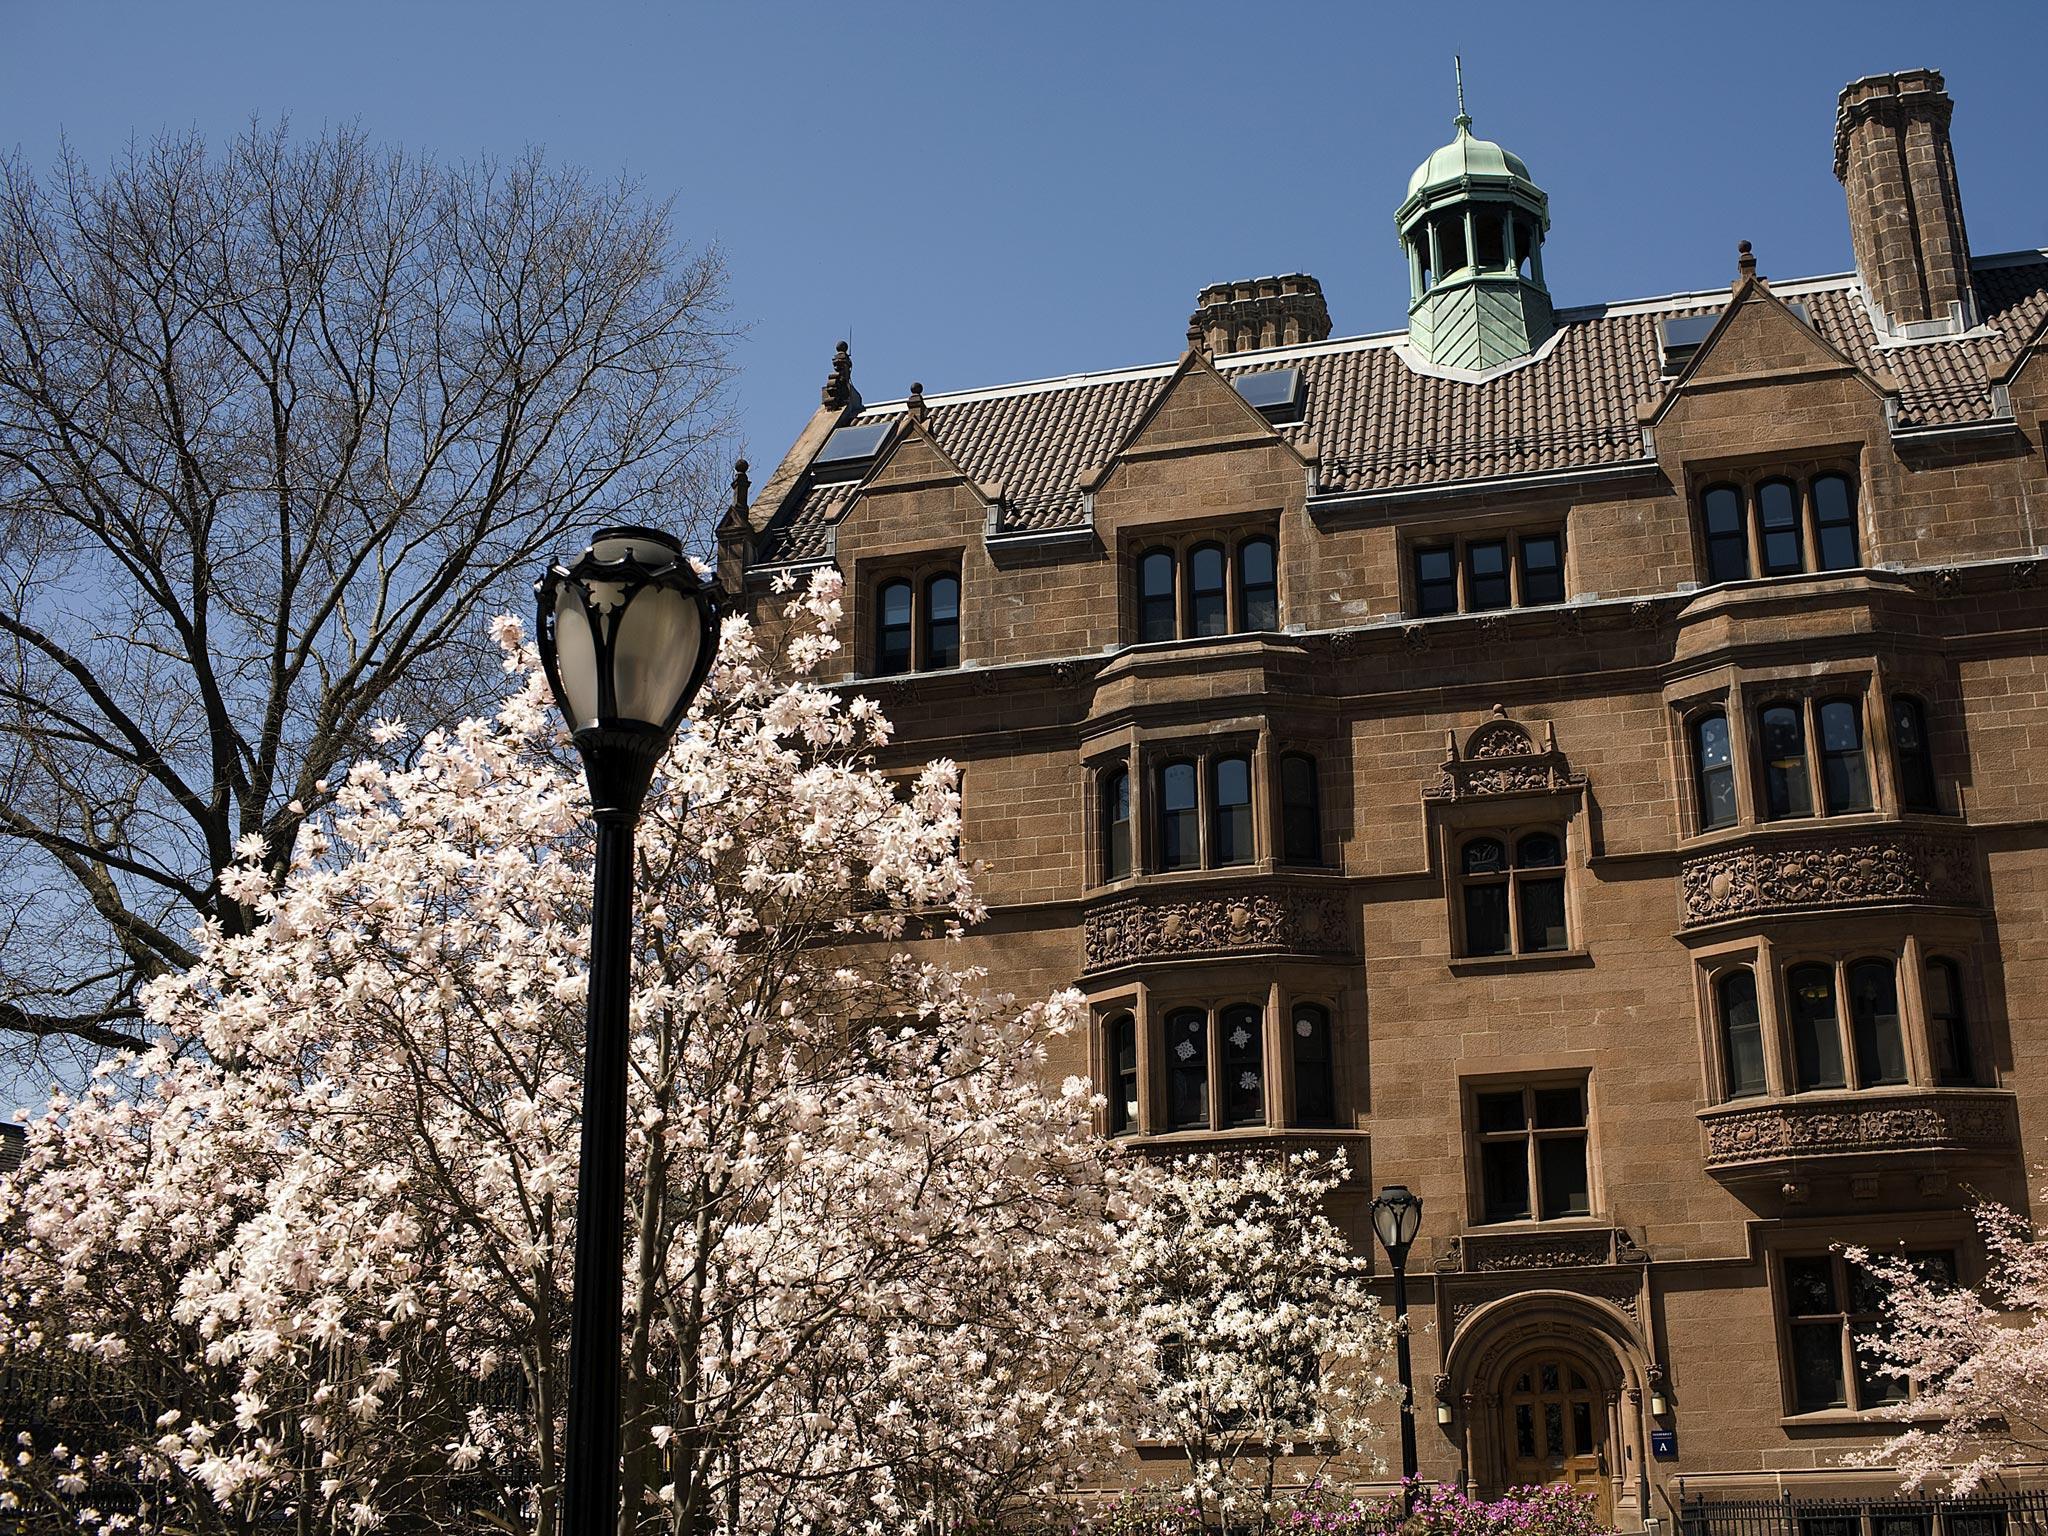 New Haven is home to Yale university as well as excellent museums and galleries